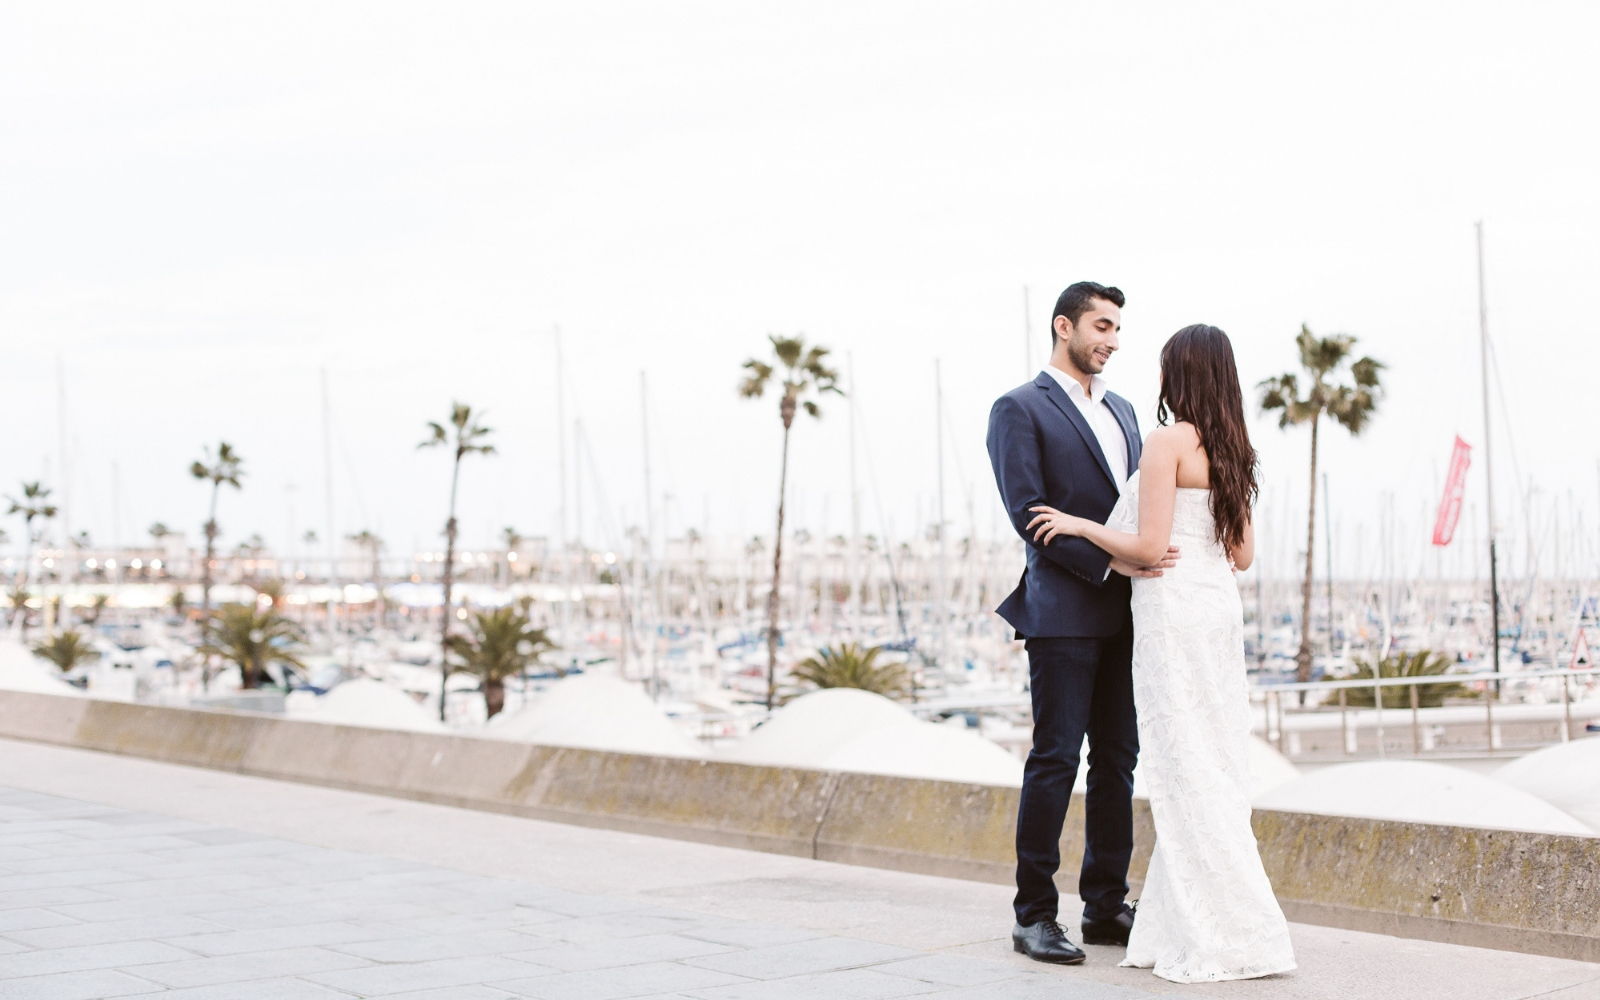 Engagement photo session at the beach in Barcelona